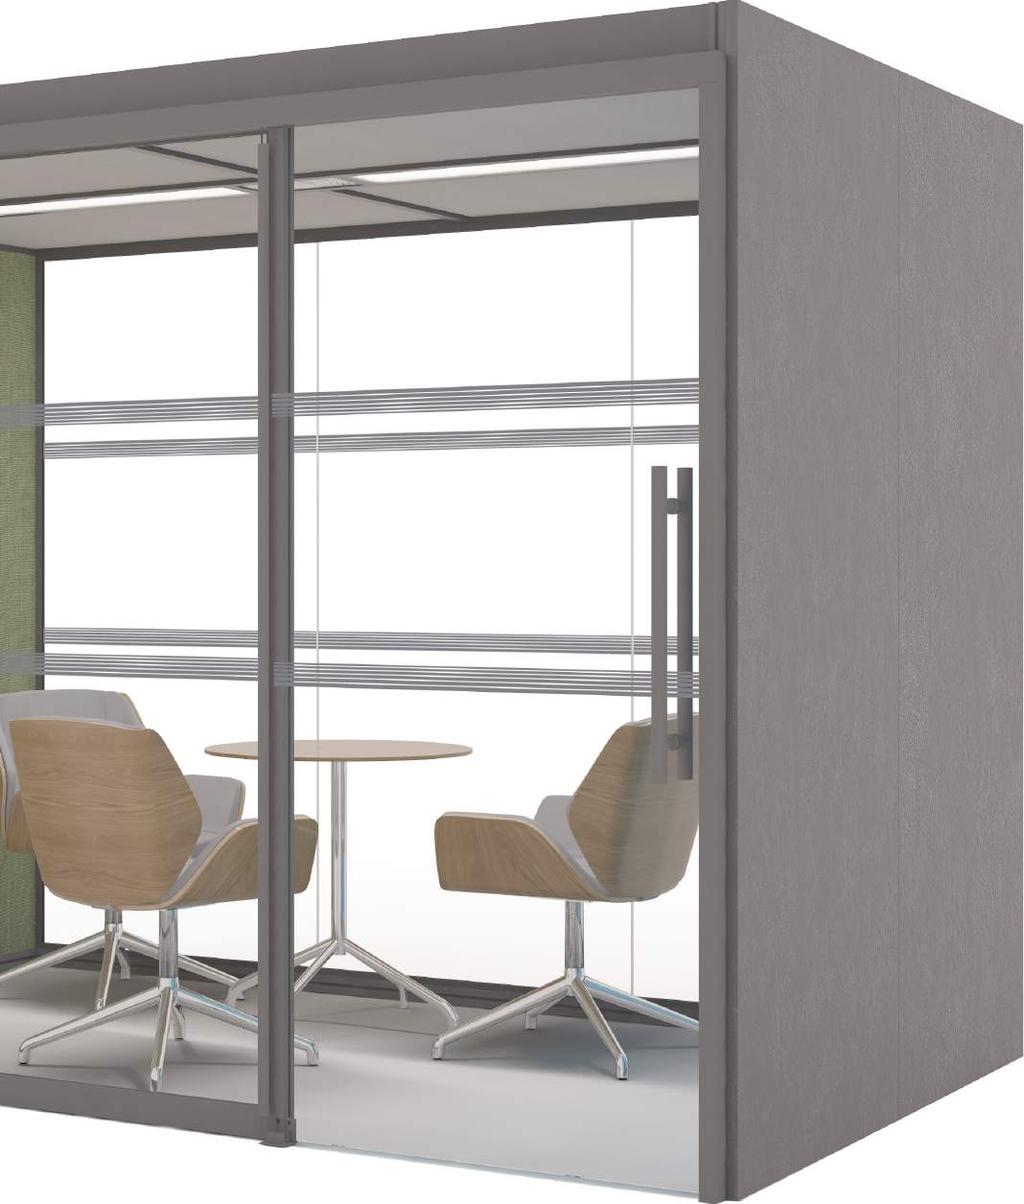 Whether being used for an informal coffee meeting, or the more traditional one-to-one area, Aspect 2 is the perfect meeting room for up to 4 people.